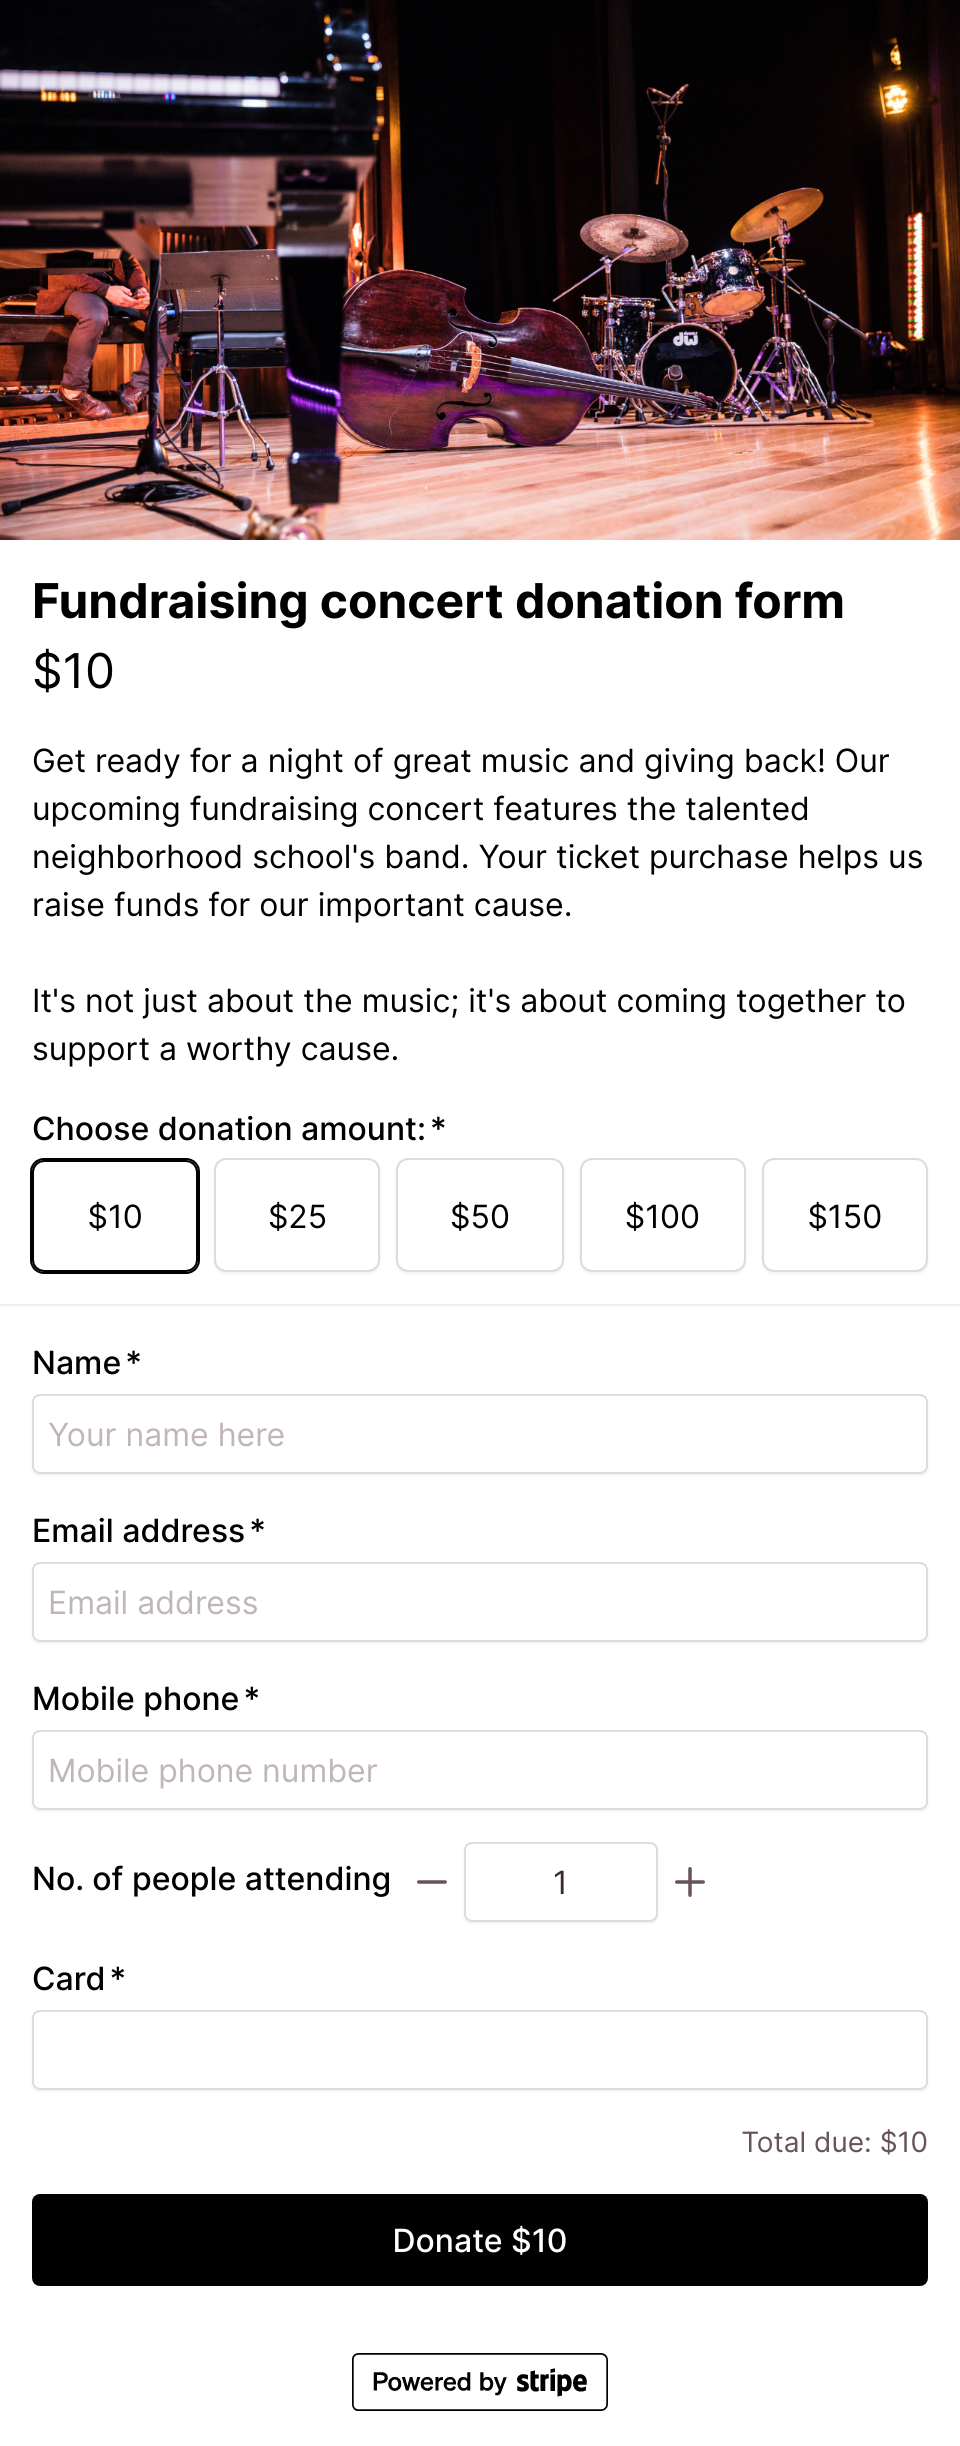 Fundraising concert donation form template